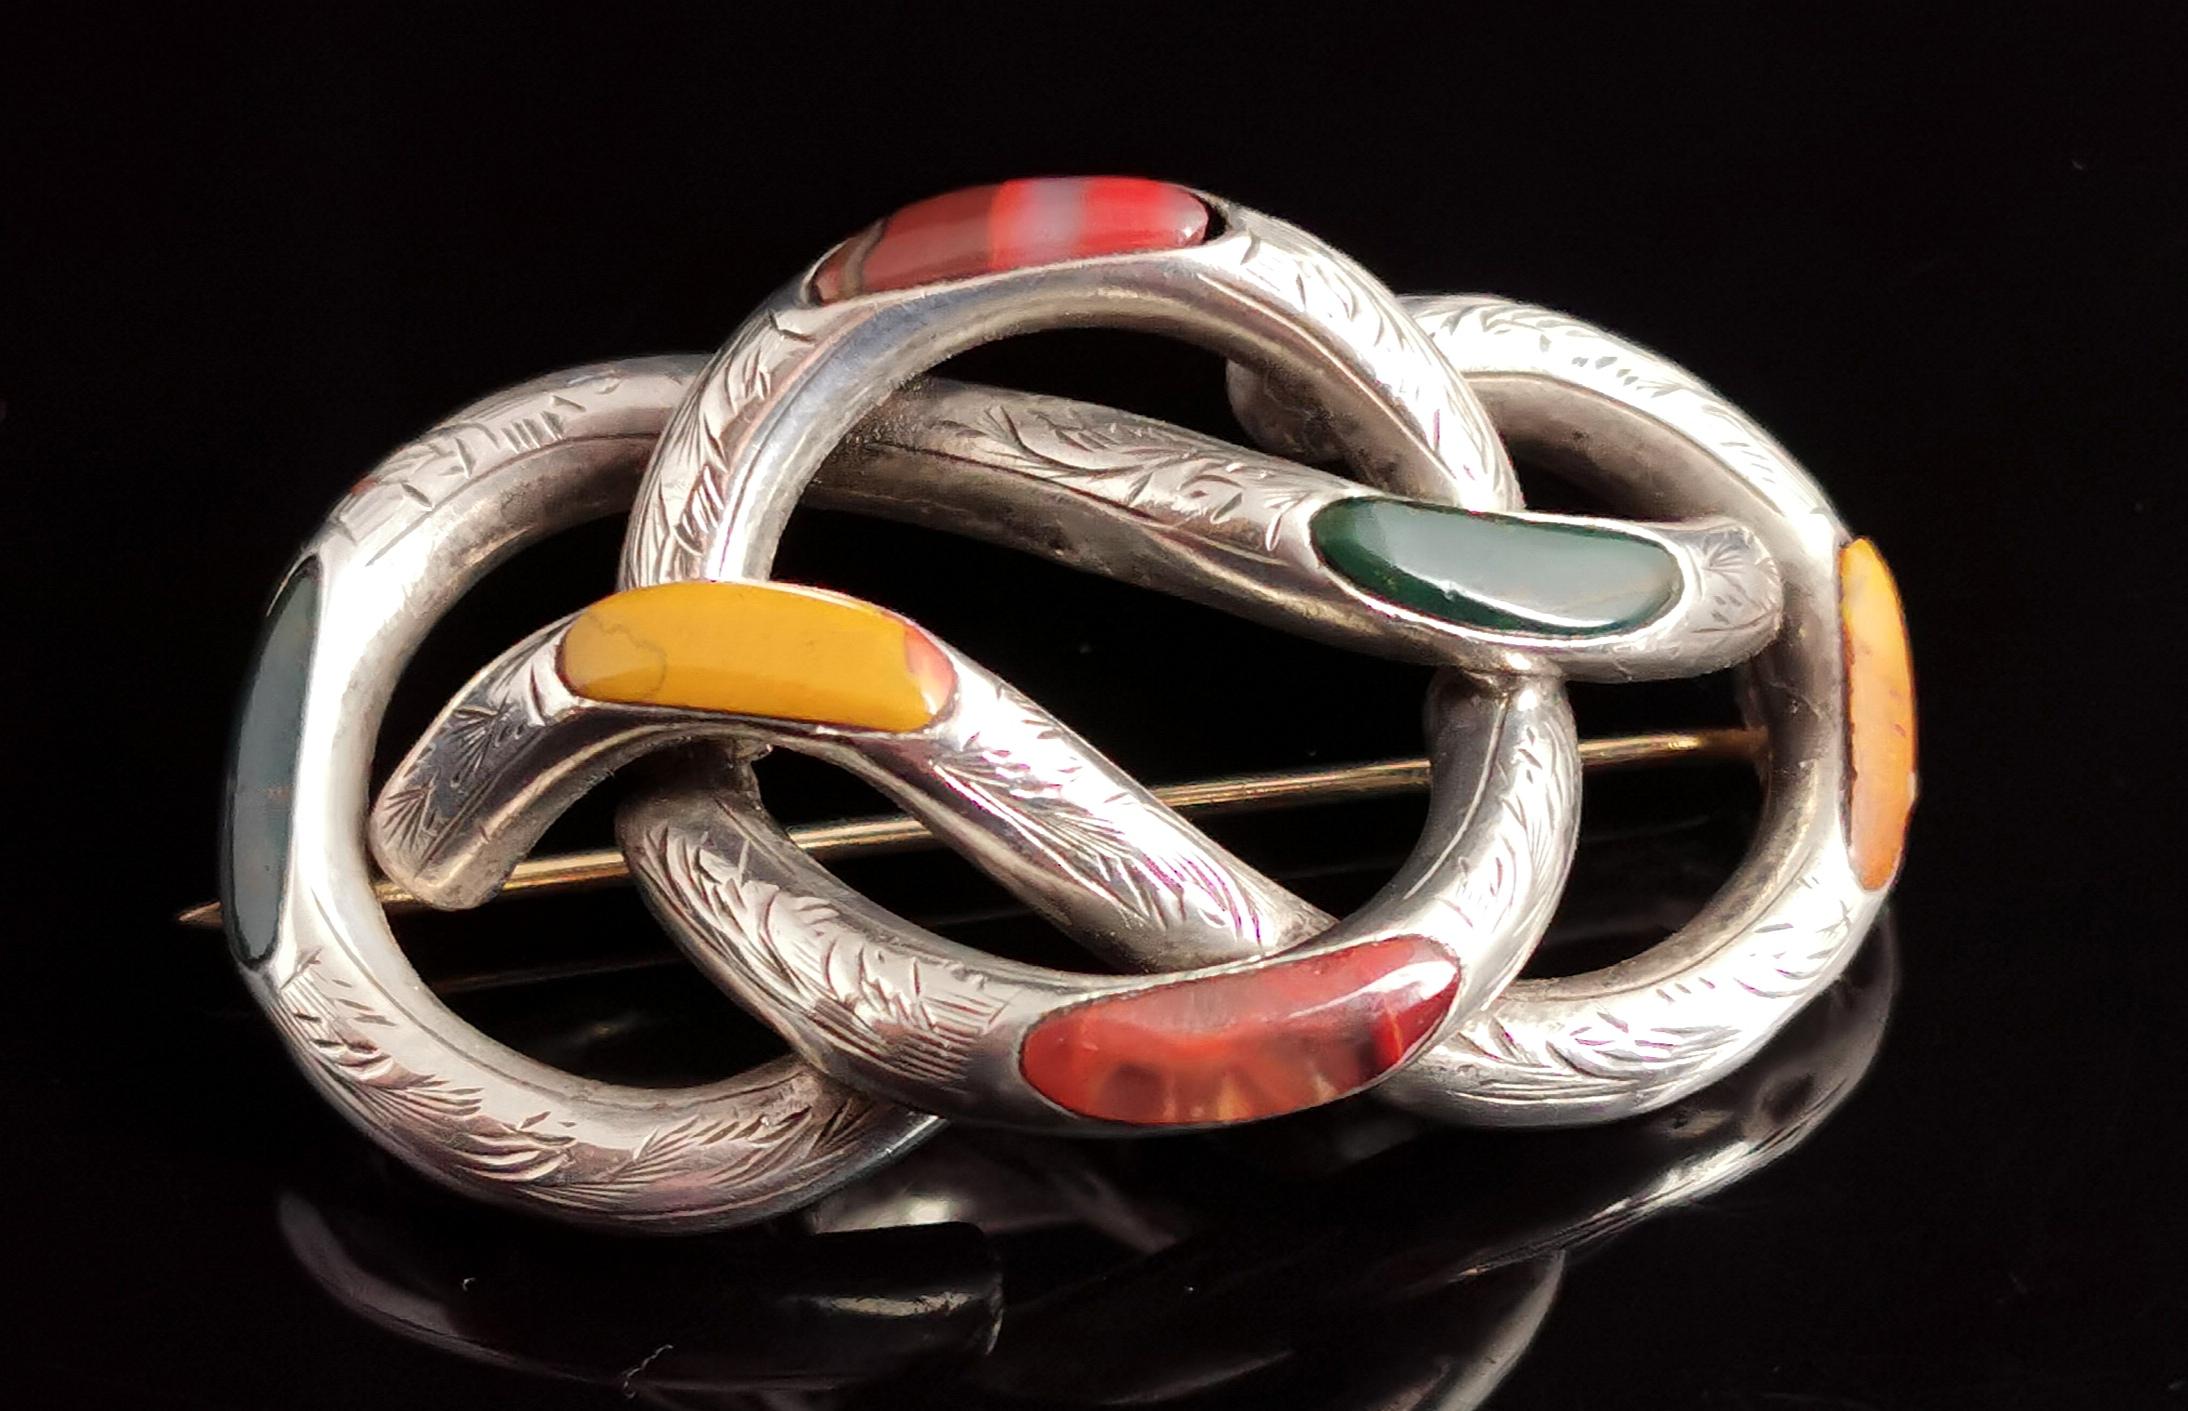 A beautiful antique Scottish agate and sterling silver knot brooch.

An attractive lightly engraved silver knot inset with various agates of different colours.

There is red Jasper with some lovely clear accents, mustard agate and bloodstone, giving